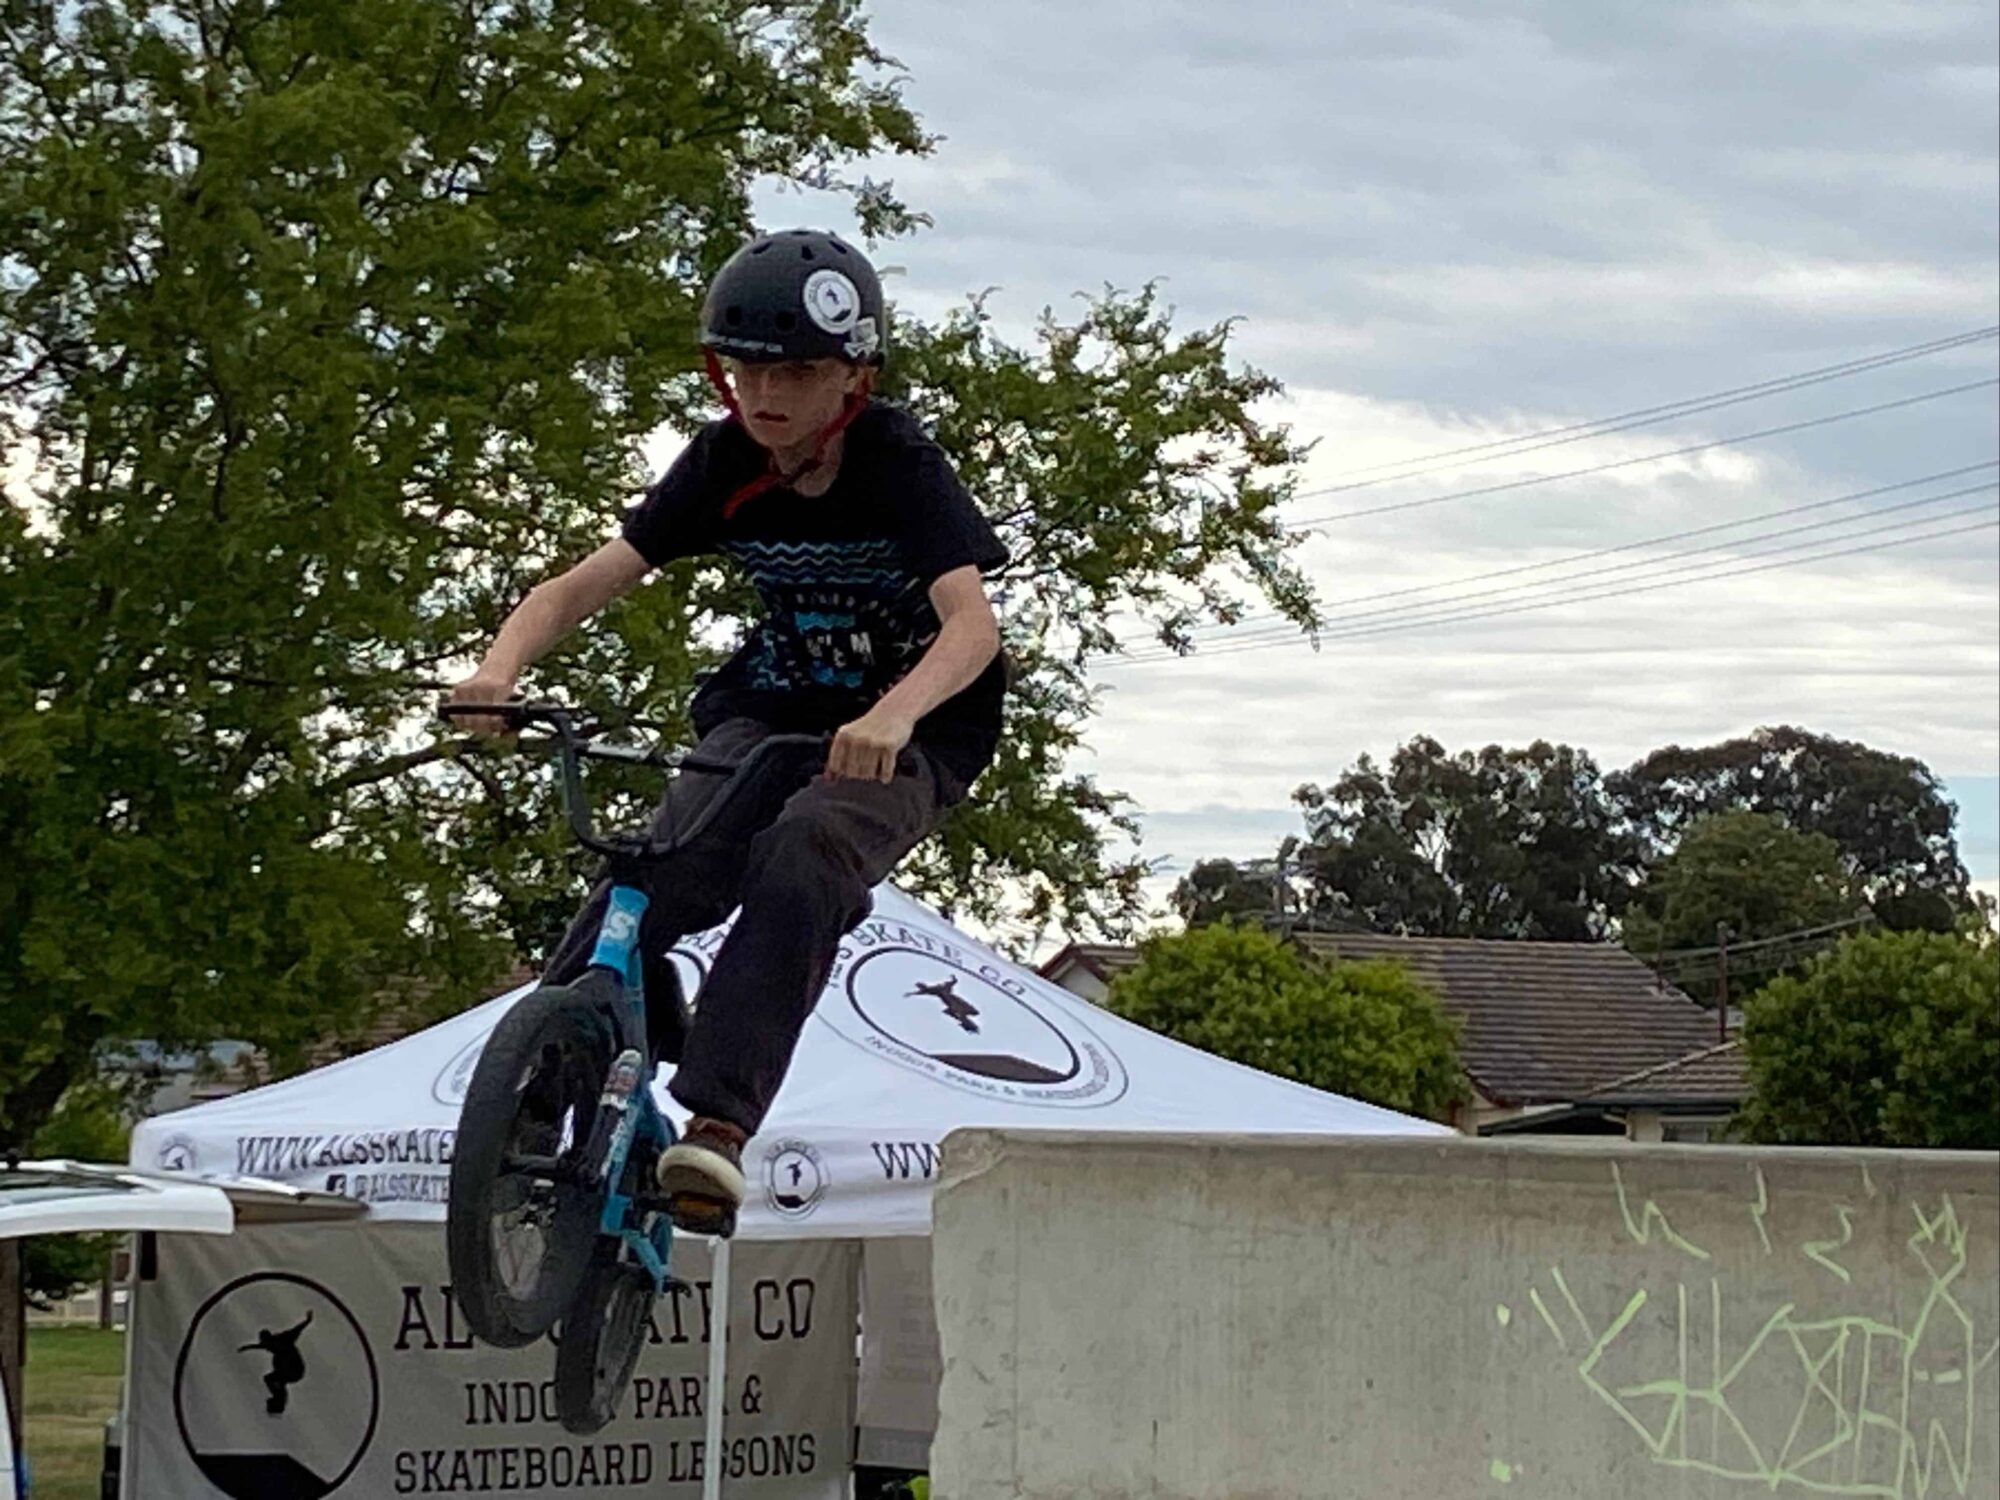 BMX Bike rider jumping in the air with tree behind